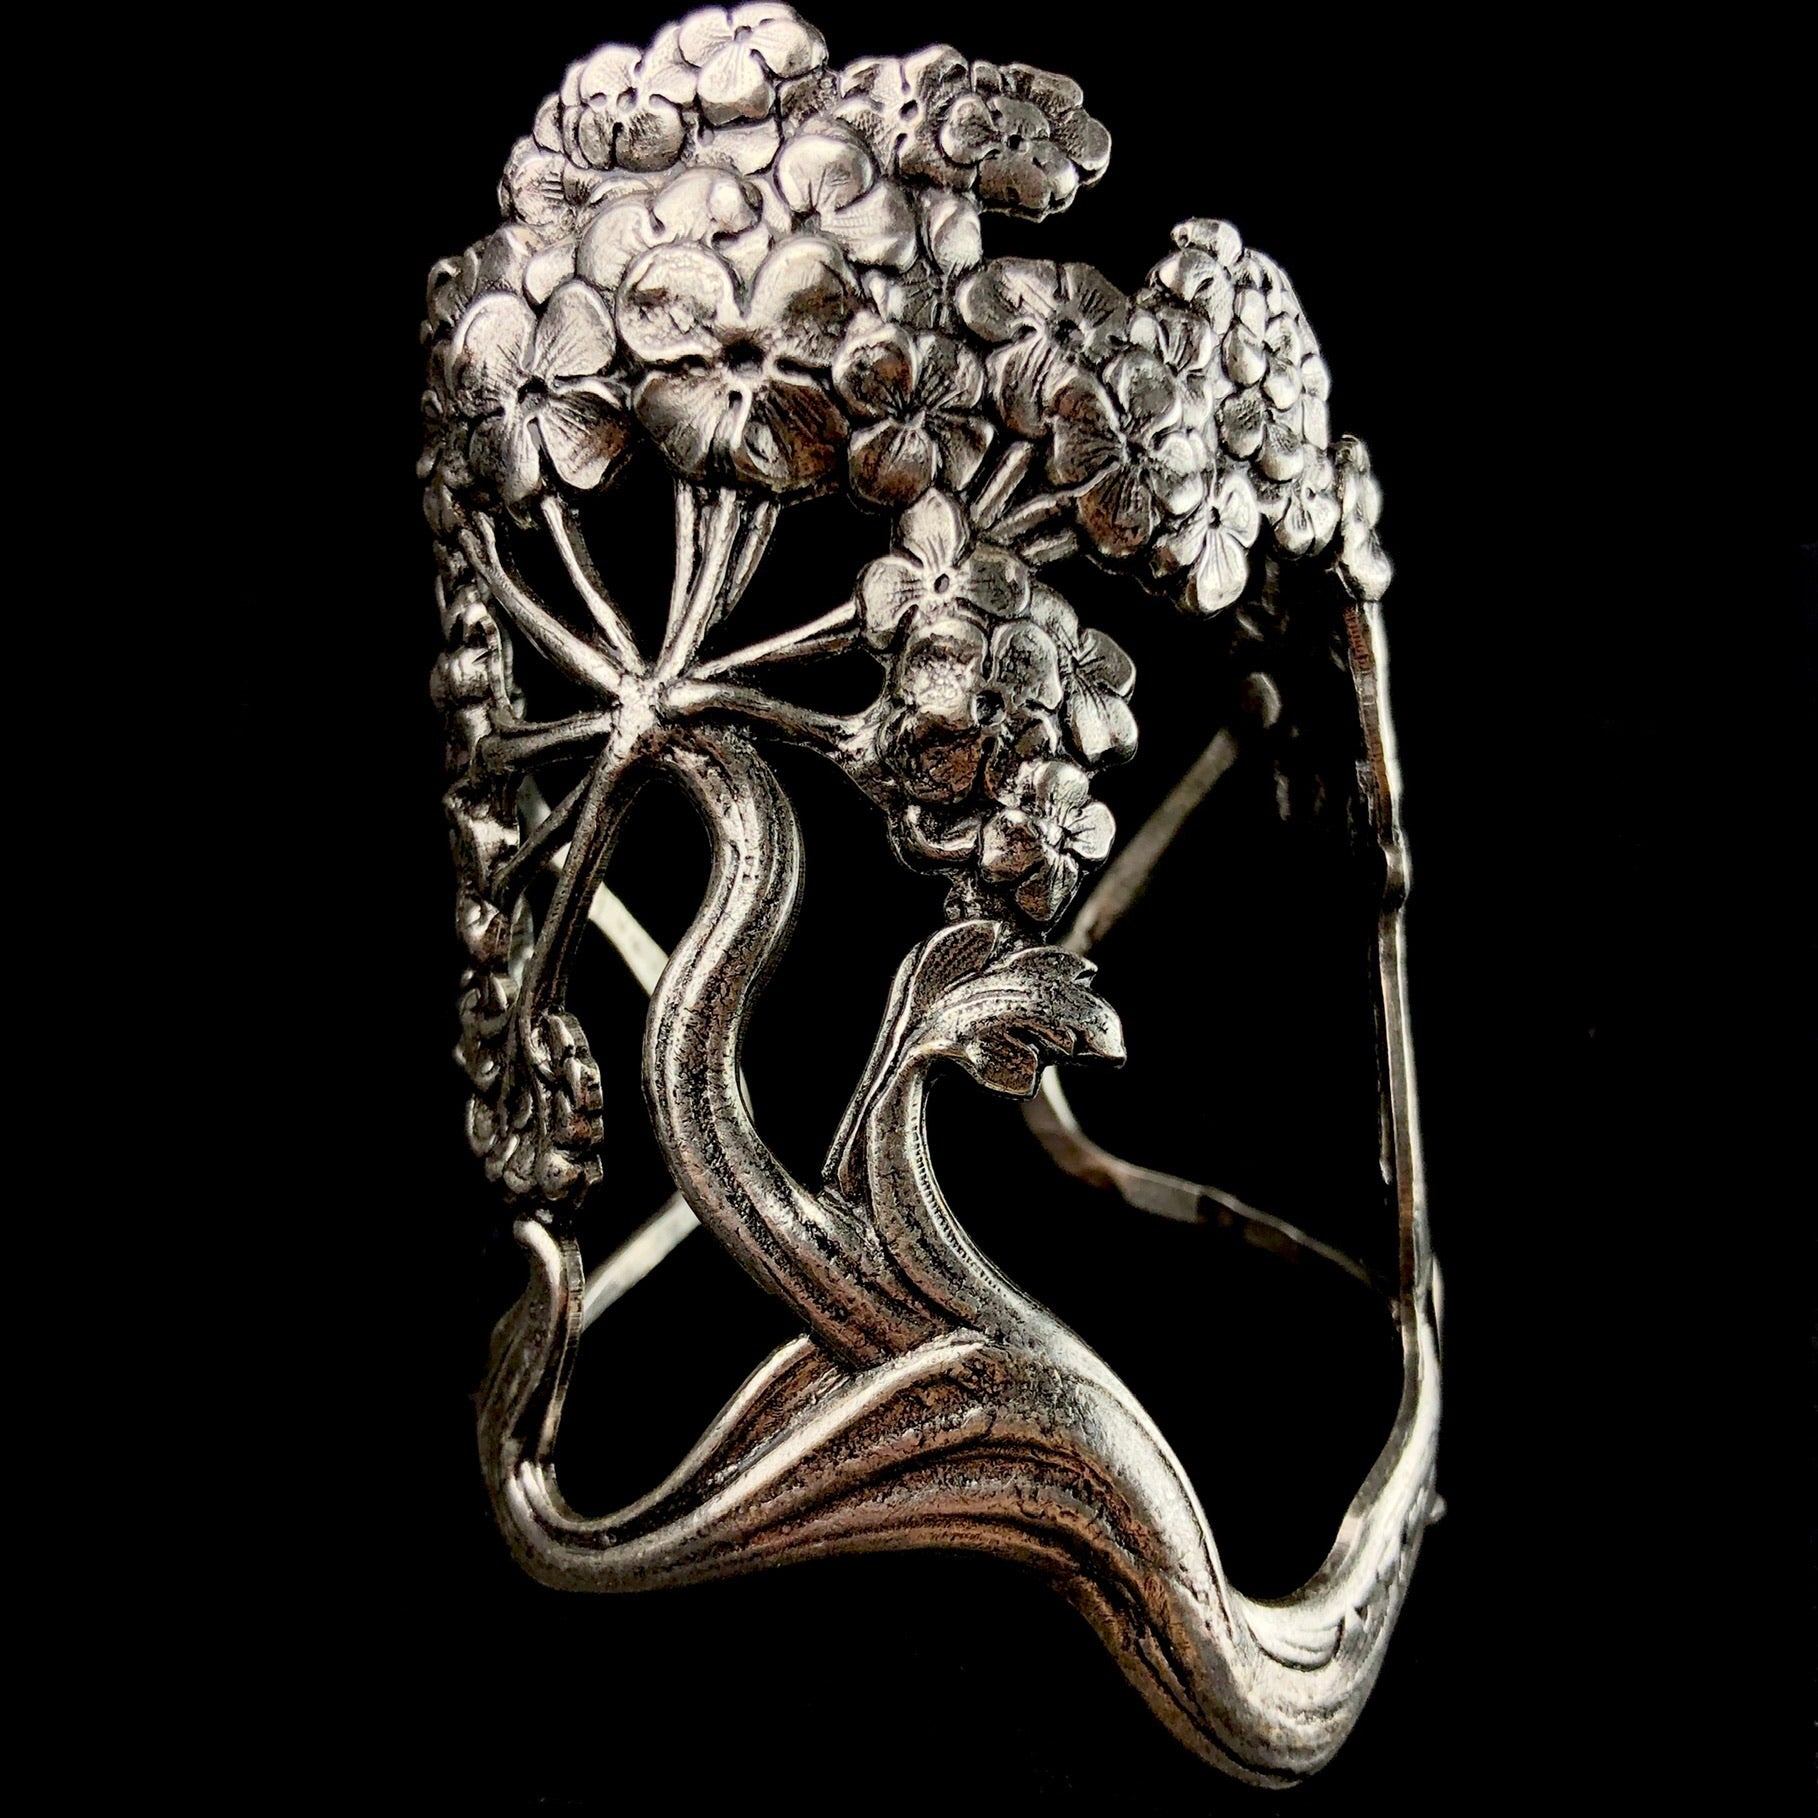 Detailed relief of Wisteria flower and branch creating cuff of bracelet